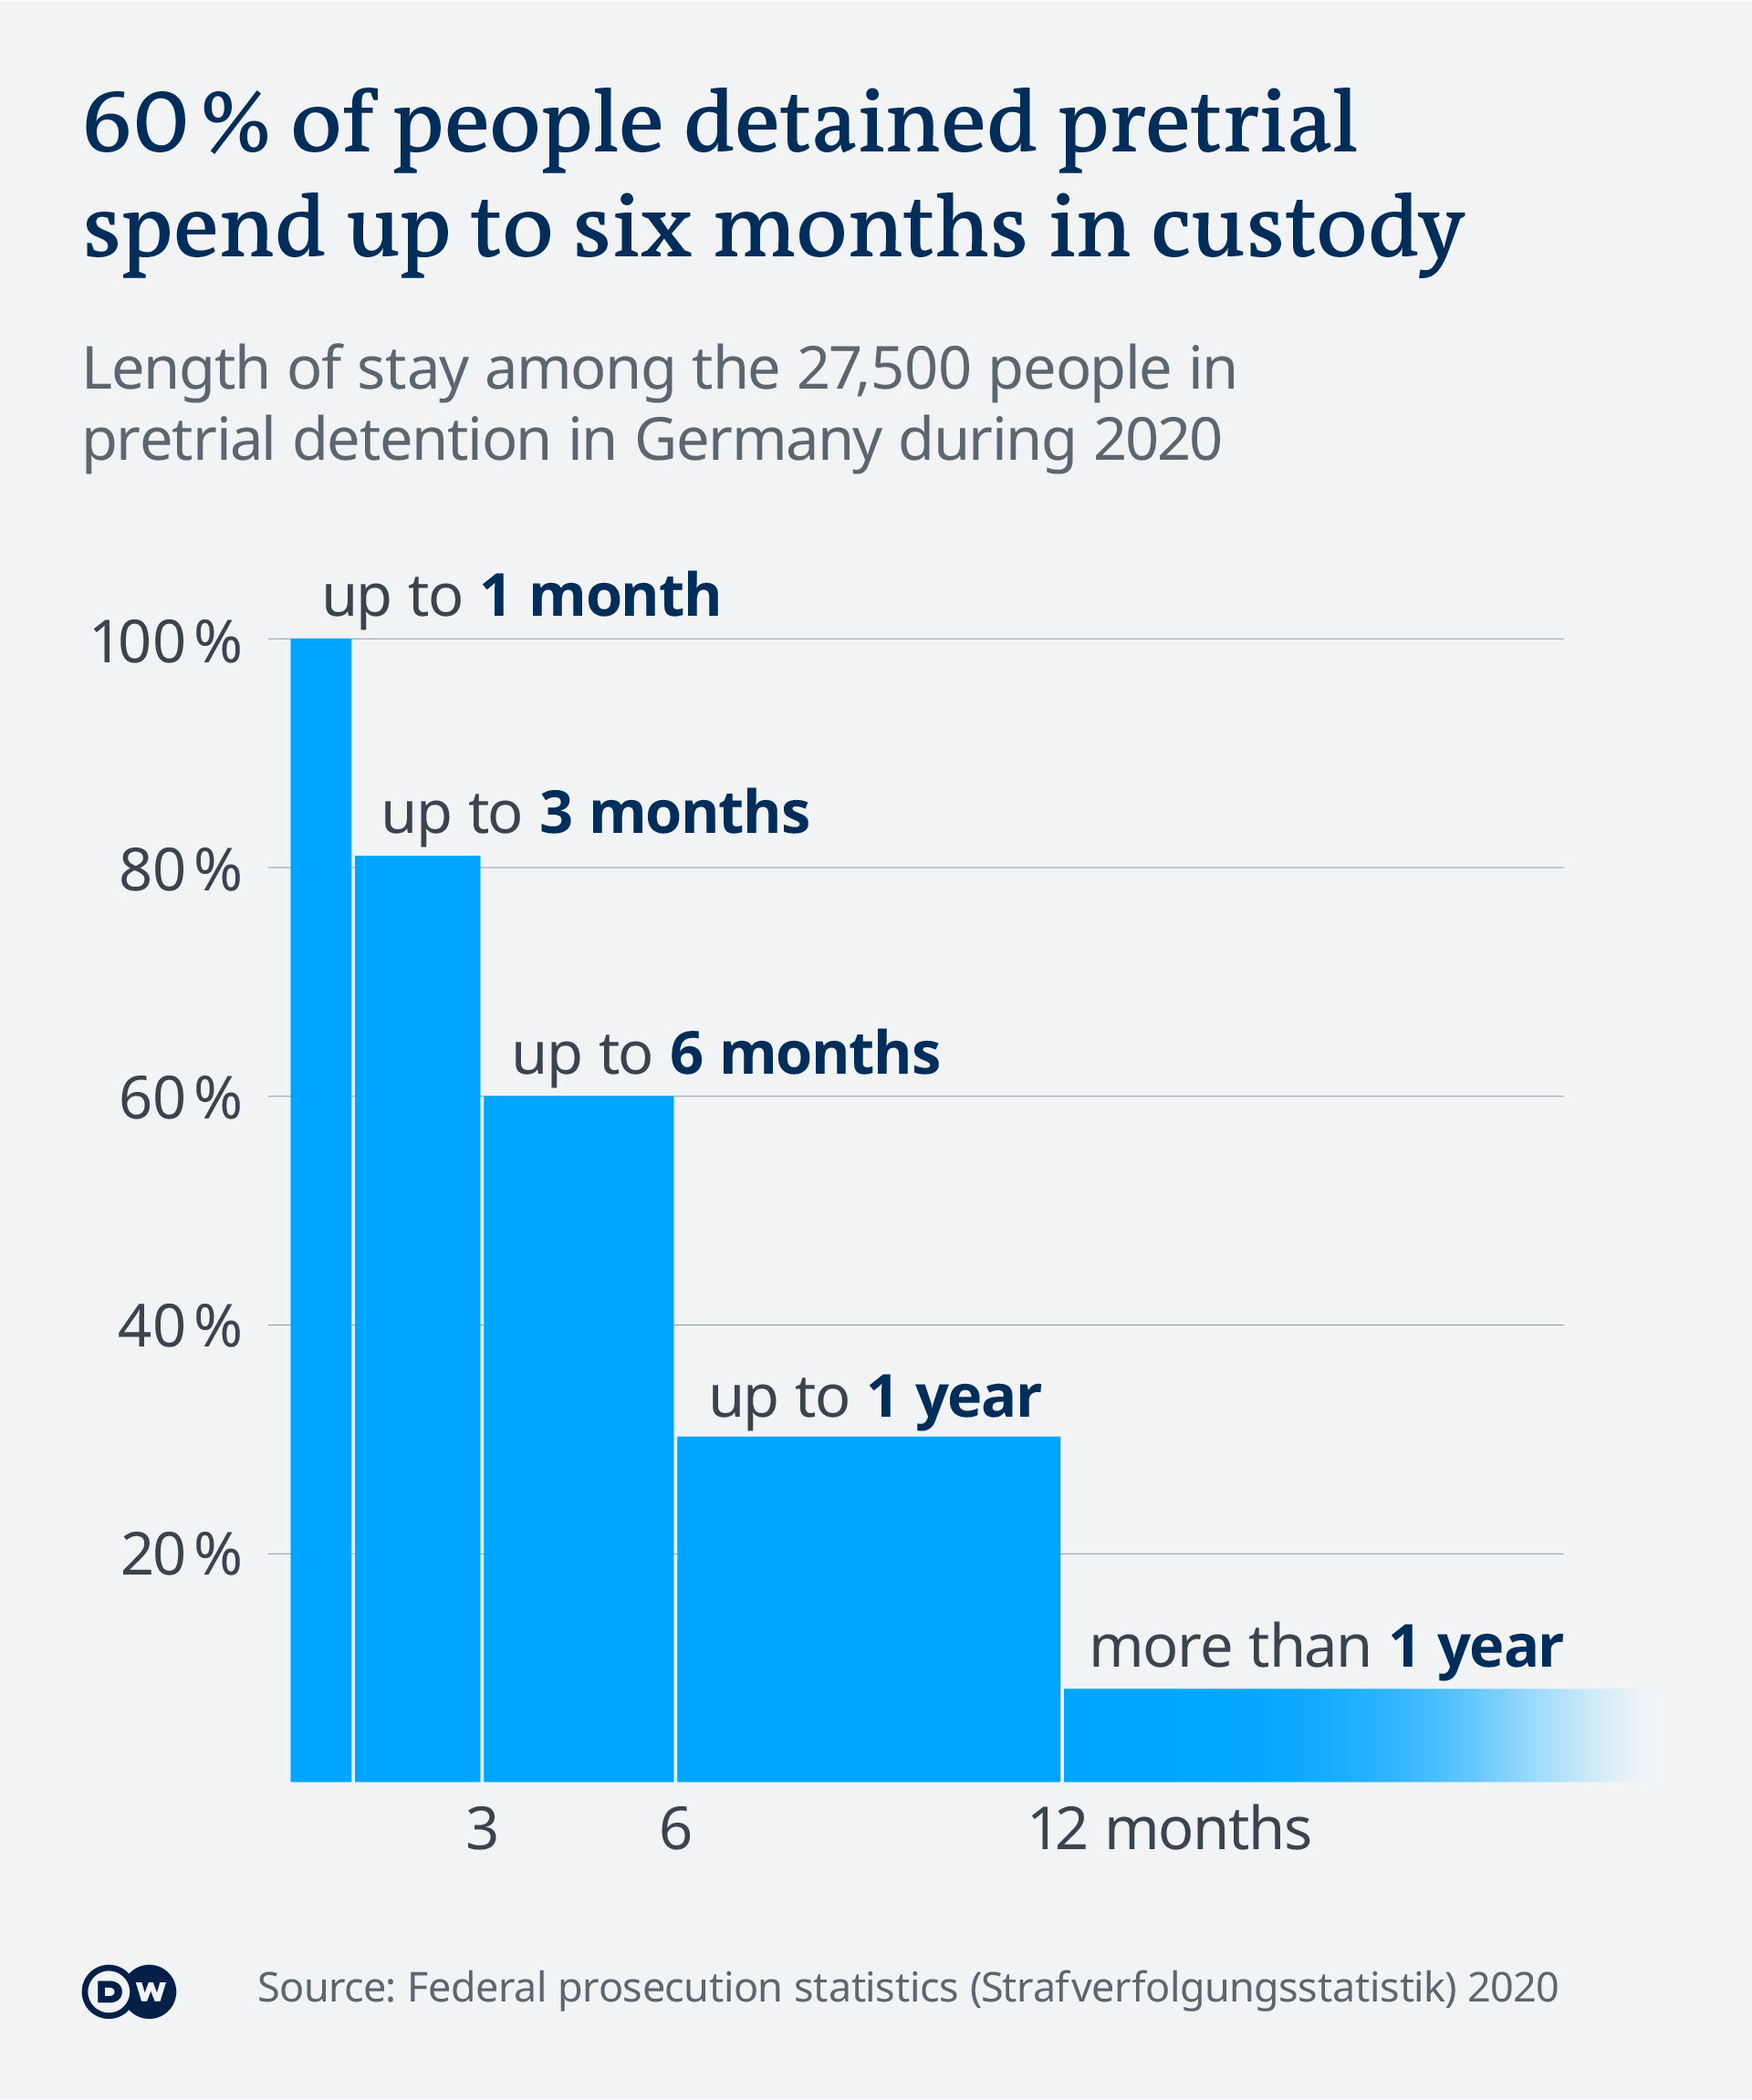 Data visualization showing that 60% of people detained pretrial in Germany spend up to six months in custody, 80% spend up to 3 months, 30% spend up to a year, and 8% stay for overa year.